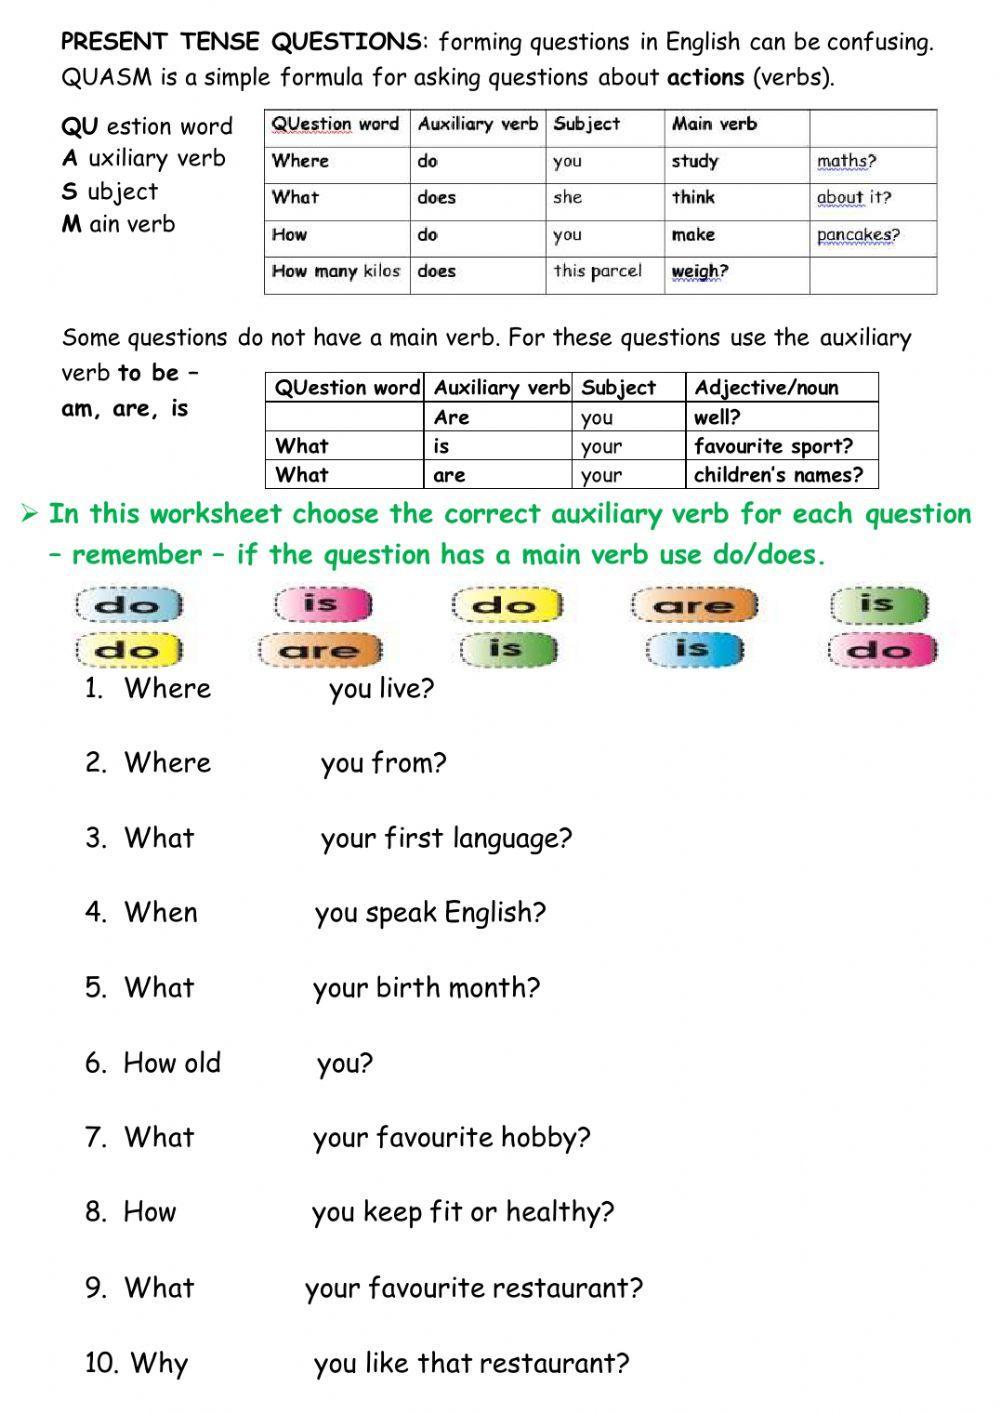 Auxiliary Verbs (do is are) in Present Simple Questions